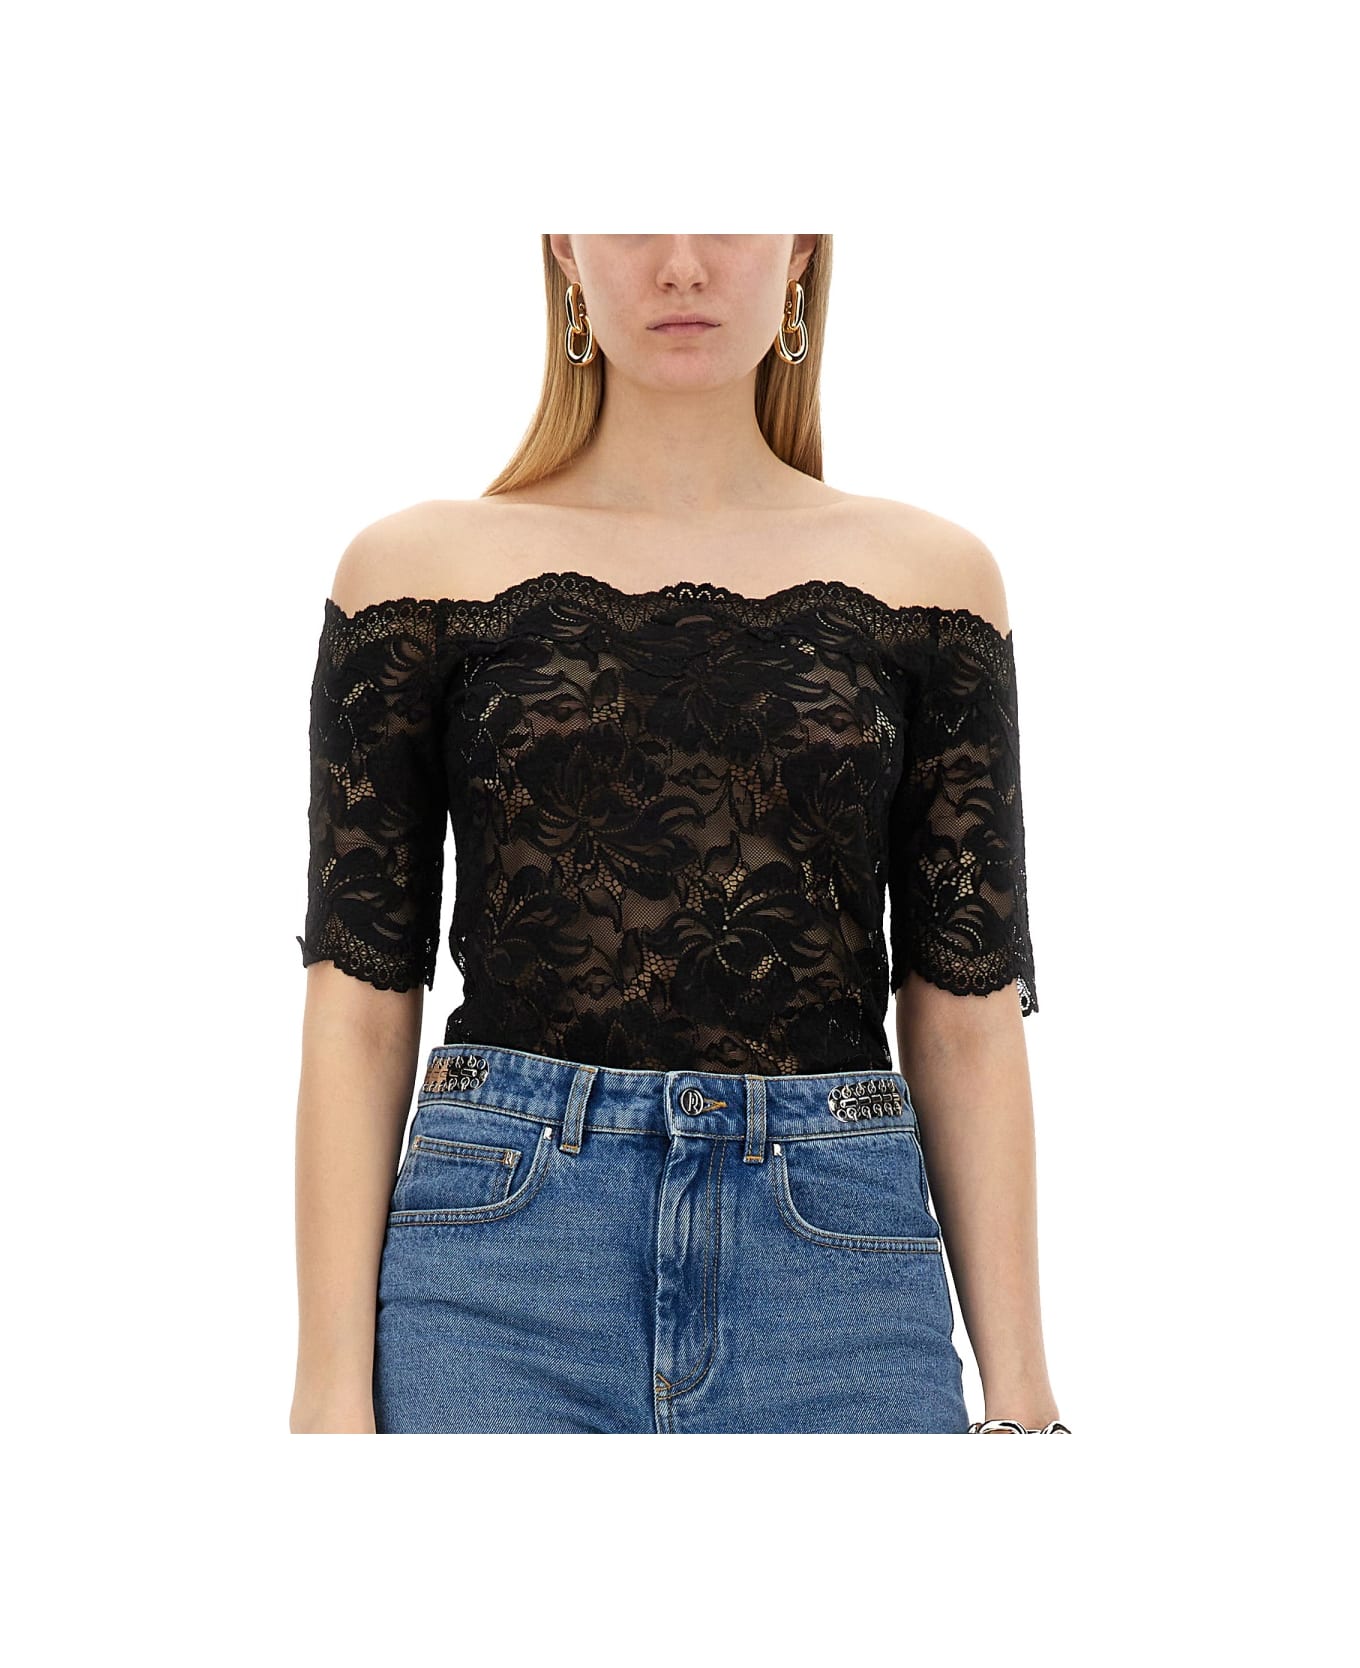 Paco Rabanne Lace Top - BLACK トップス